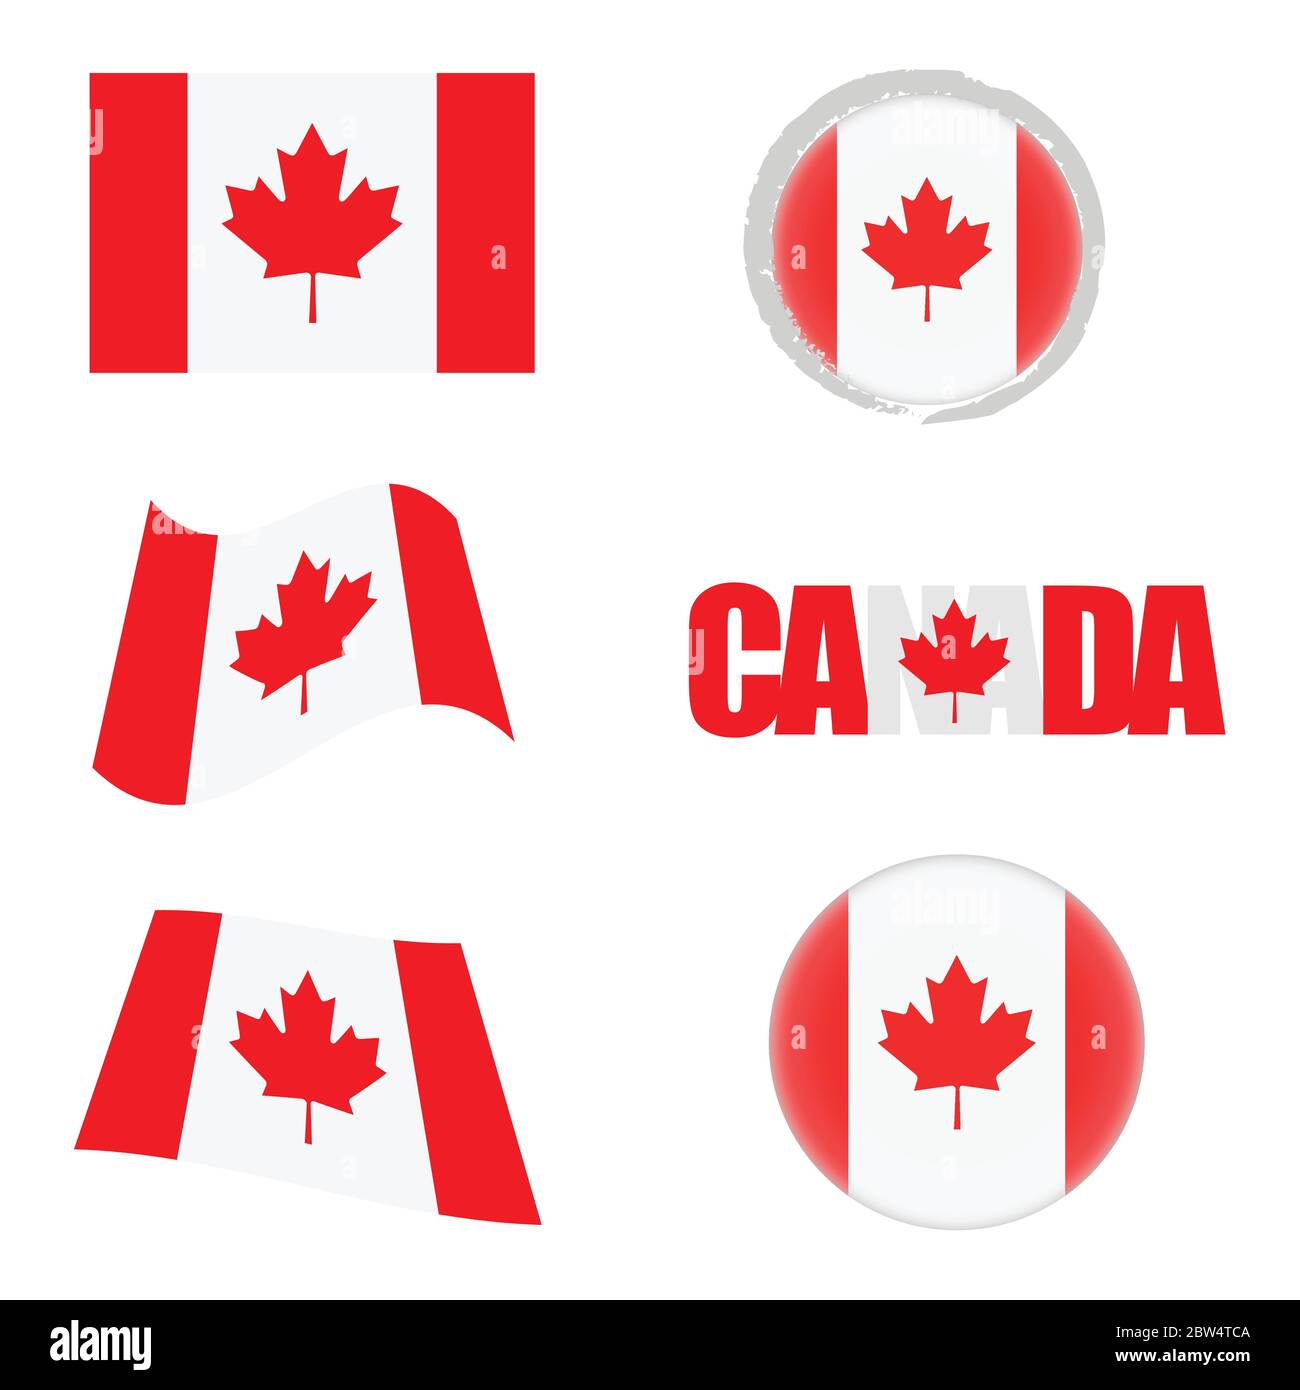 canada flag icon illustration in red color Stock Vector